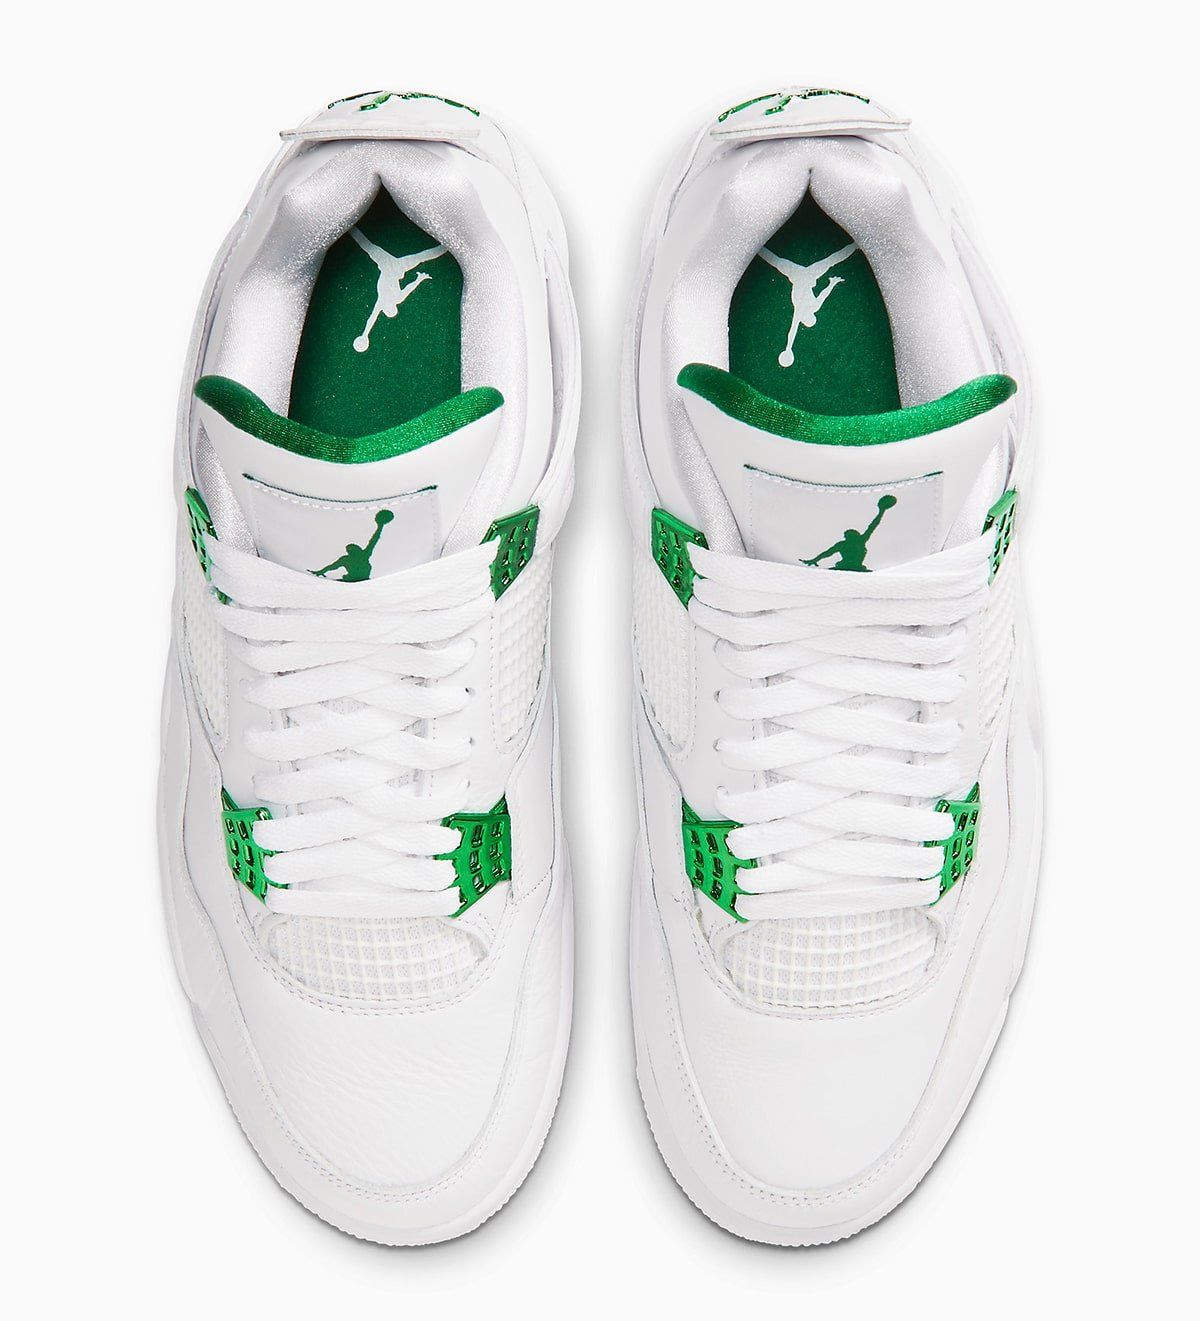 green and white 4s